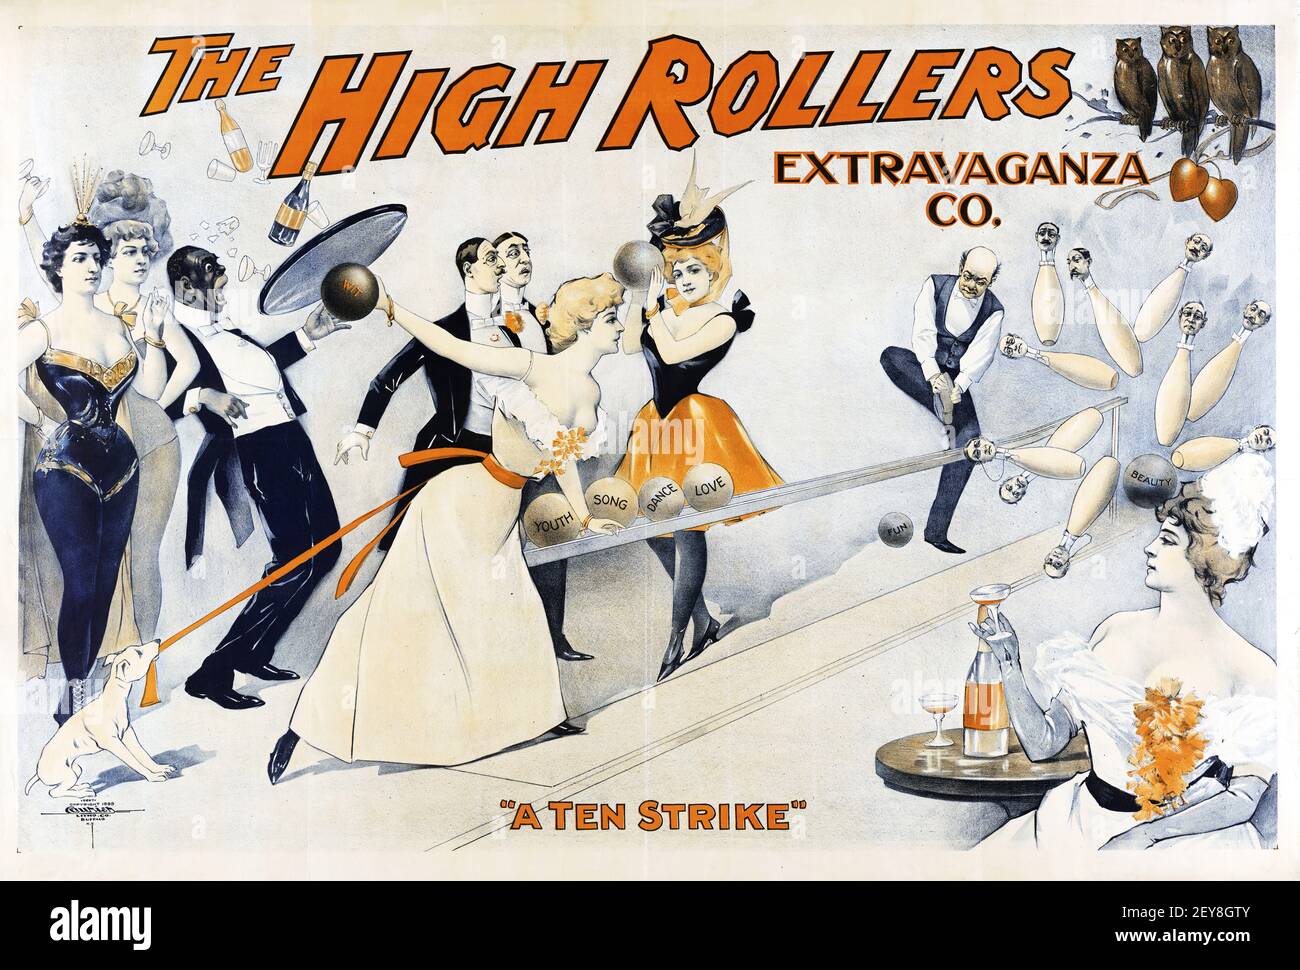 The High Rollers Extravaganza Co. Bowling, 'A Ten Strike'. Stock Photo